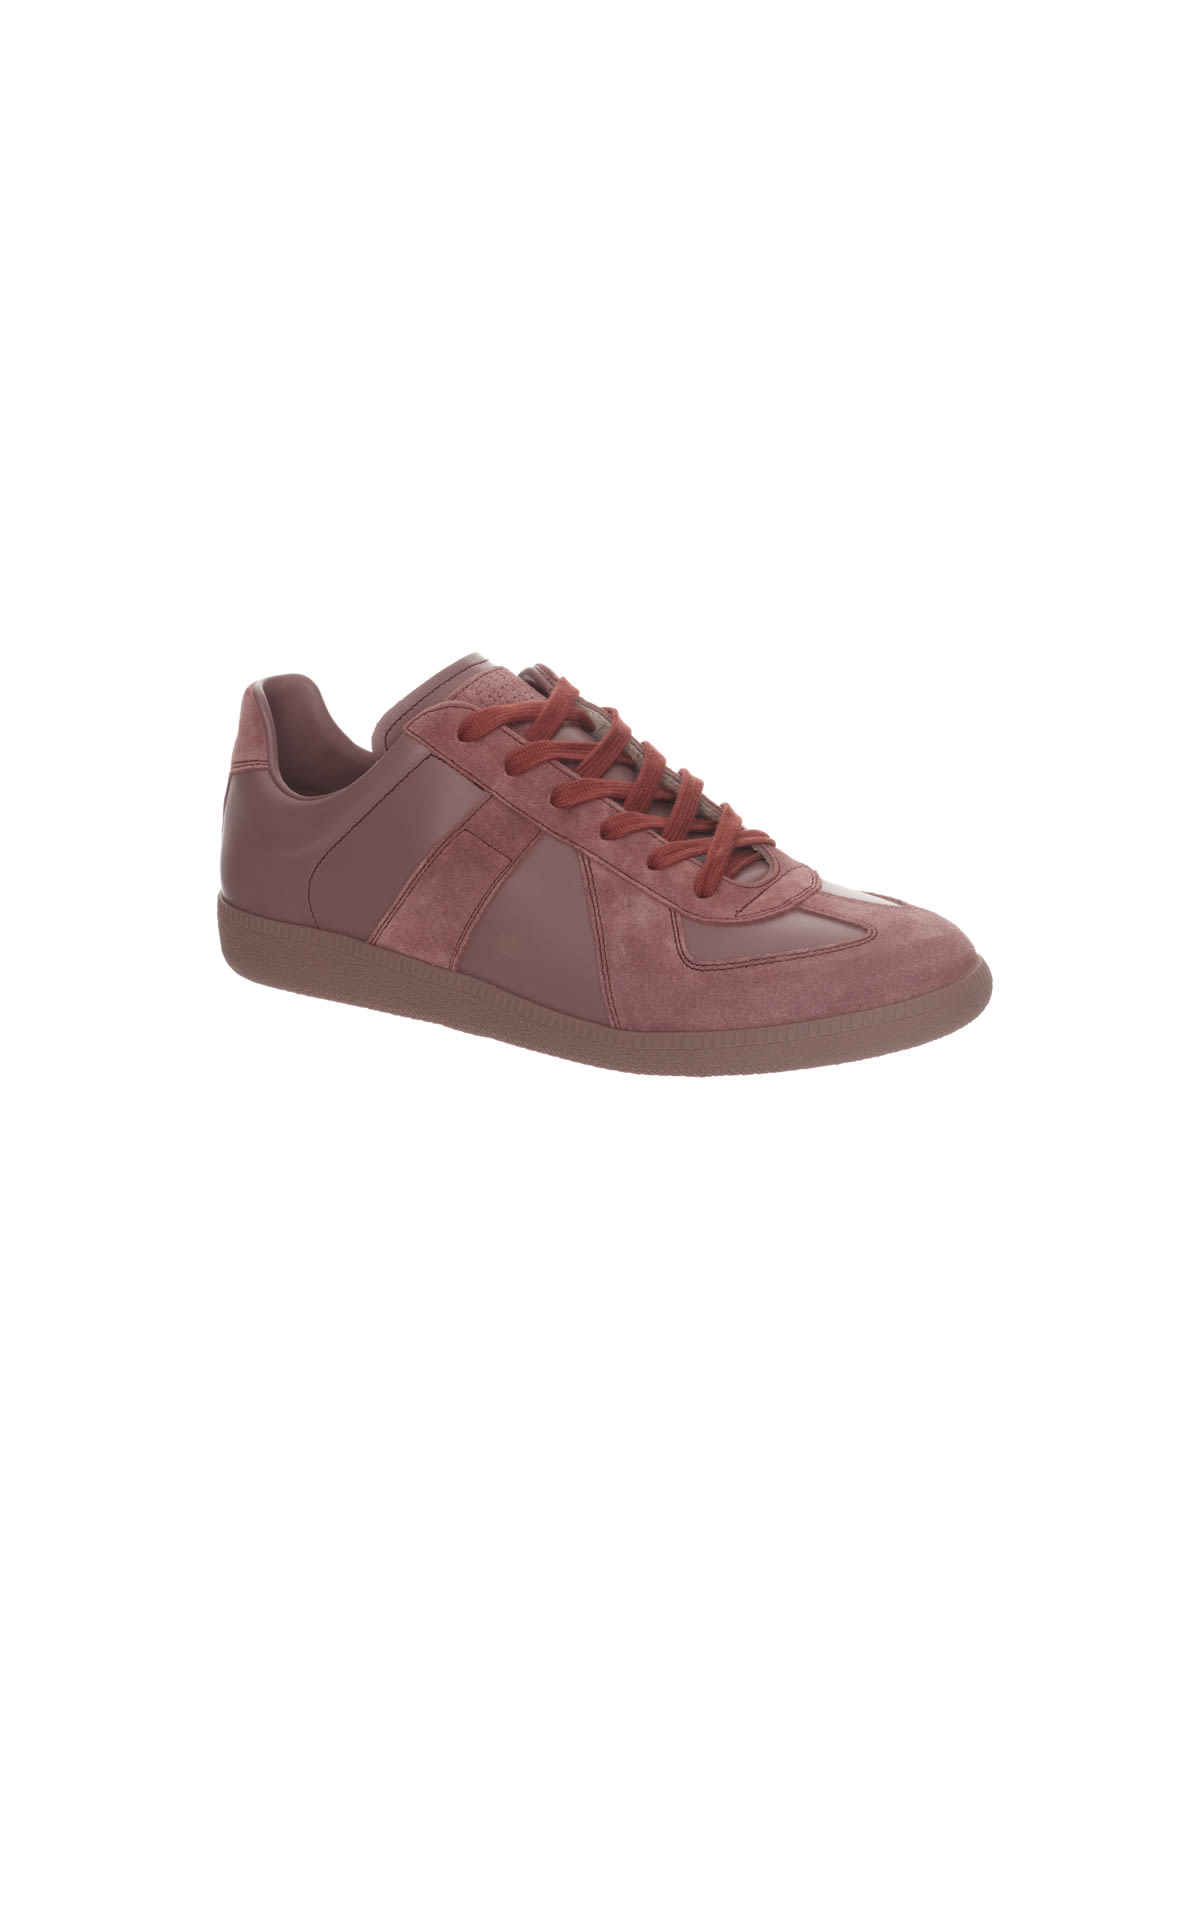 Maison Margiela Replica sneakers from Bicester Village